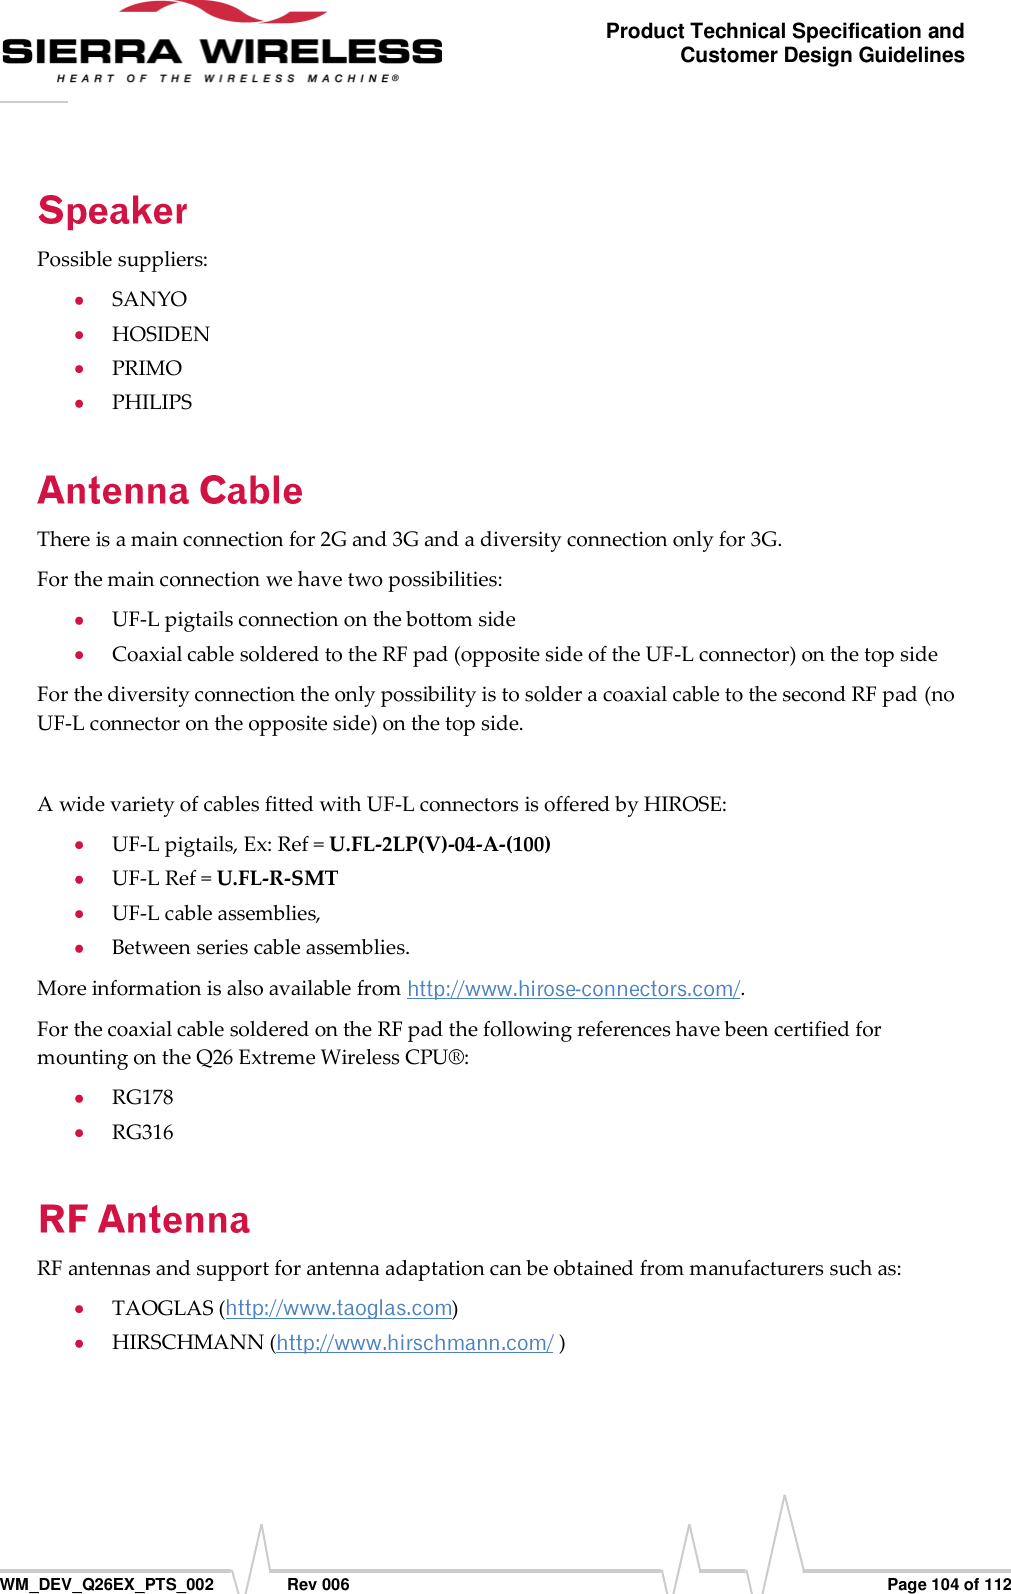      WM_DEV_Q26EX_PTS_002  Rev 006  Page 104 of 112 Product Technical Specification and Customer Design Guidelines Possible suppliers:  SANYO  HOSIDEN  PRIMO  PHILIPS There is a main connection for 2G and 3G and a diversity connection only for 3G. For the main connection we have two possibilities:  UF-L pigtails connection on the bottom side  Coaxial cable soldered to the RF pad (opposite side of the UF-L connector) on the top side For the diversity connection the only possibility is to solder a coaxial cable to the second RF pad (no UF-L connector on the opposite side) on the top side.  A wide variety of cables fitted with UF-L connectors is offered by HIROSE:  UF-L pigtails, Ex: Ref = U.FL-2LP(V)-04-A-(100)  UF-L Ref = U.FL-R-SMT  UF-L cable assemblies,  Between series cable assemblies. More information is also available from  . For the coaxial cable soldered on the RF pad the following references have been certified for mounting on the Q26 Extreme Wireless CPU®:  RG178  RG316 RF antennas and support for antenna adaptation can be obtained from manufacturers such as:  TAOGLAS ( )  HIRSCHMANN (  ) 